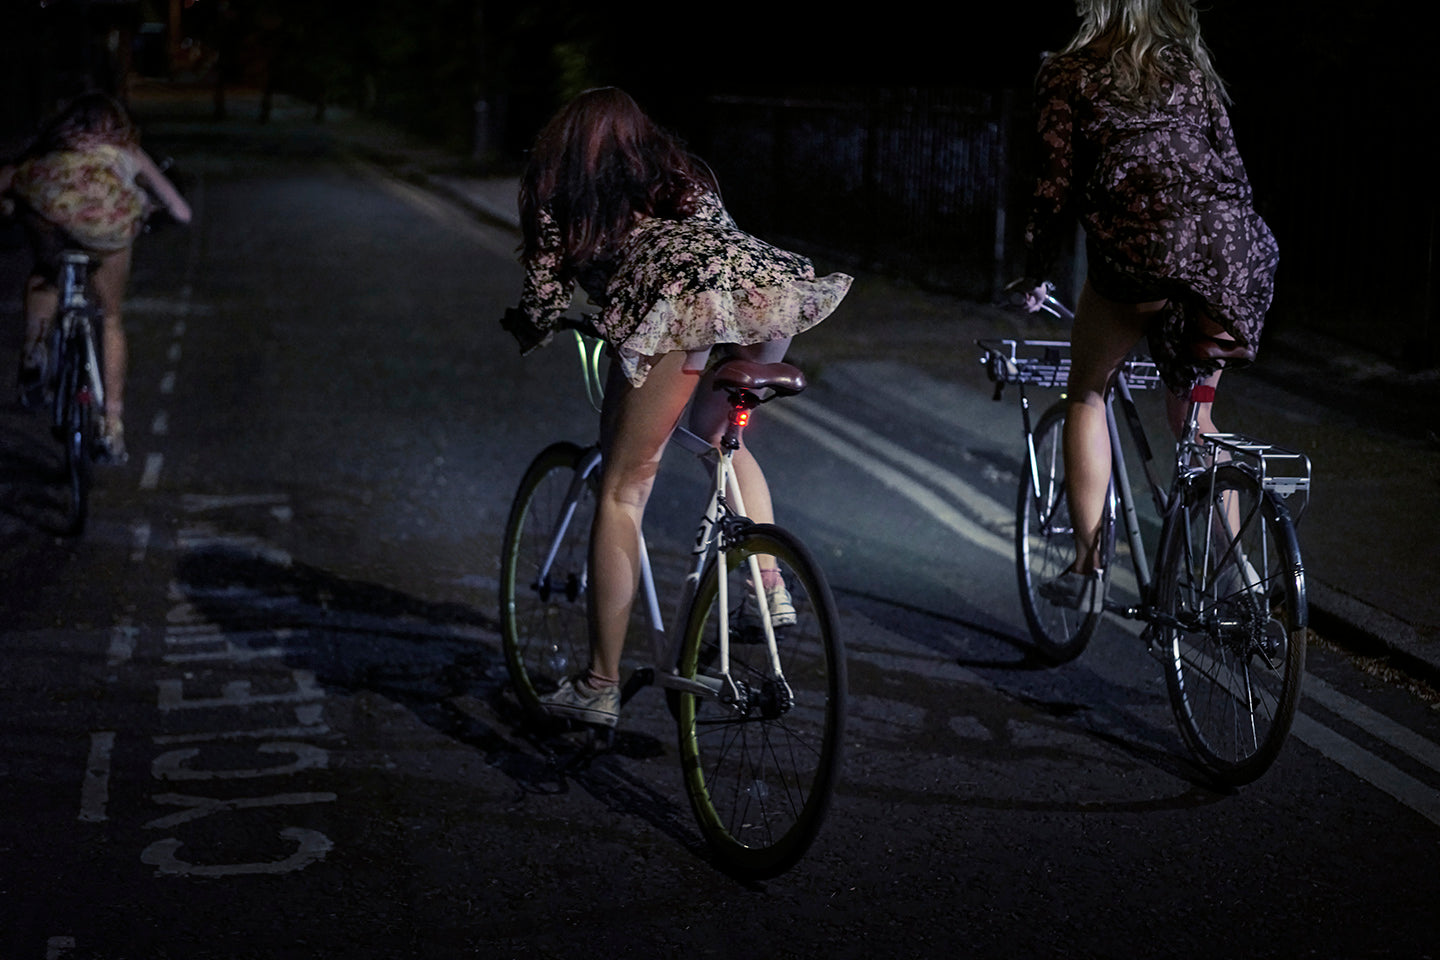 The crazy girl cyclists